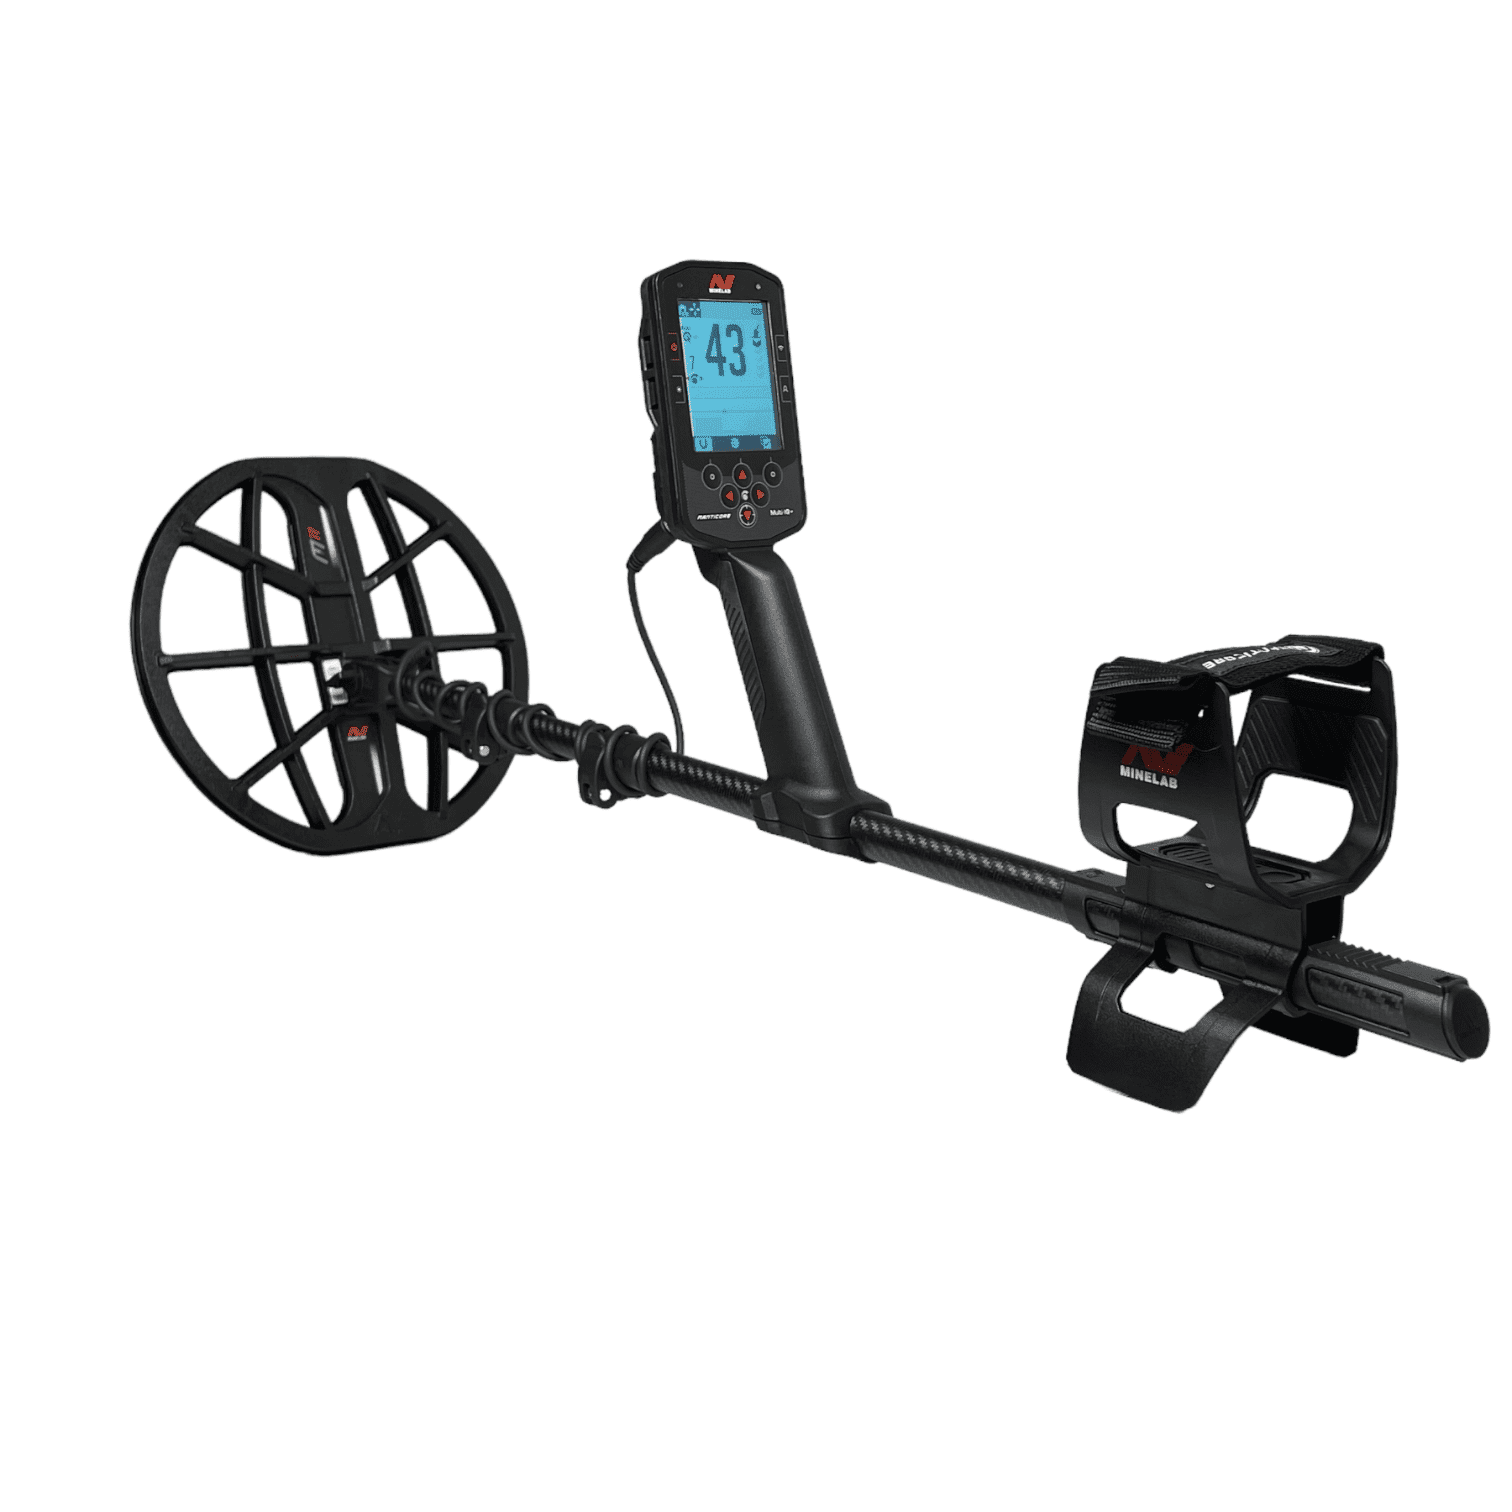 Minelab Manticore High Power Metal Detector and Pro-Find 40 Pinpointer with FREE Gear (Limited Time, Free Overnight Shipping!)